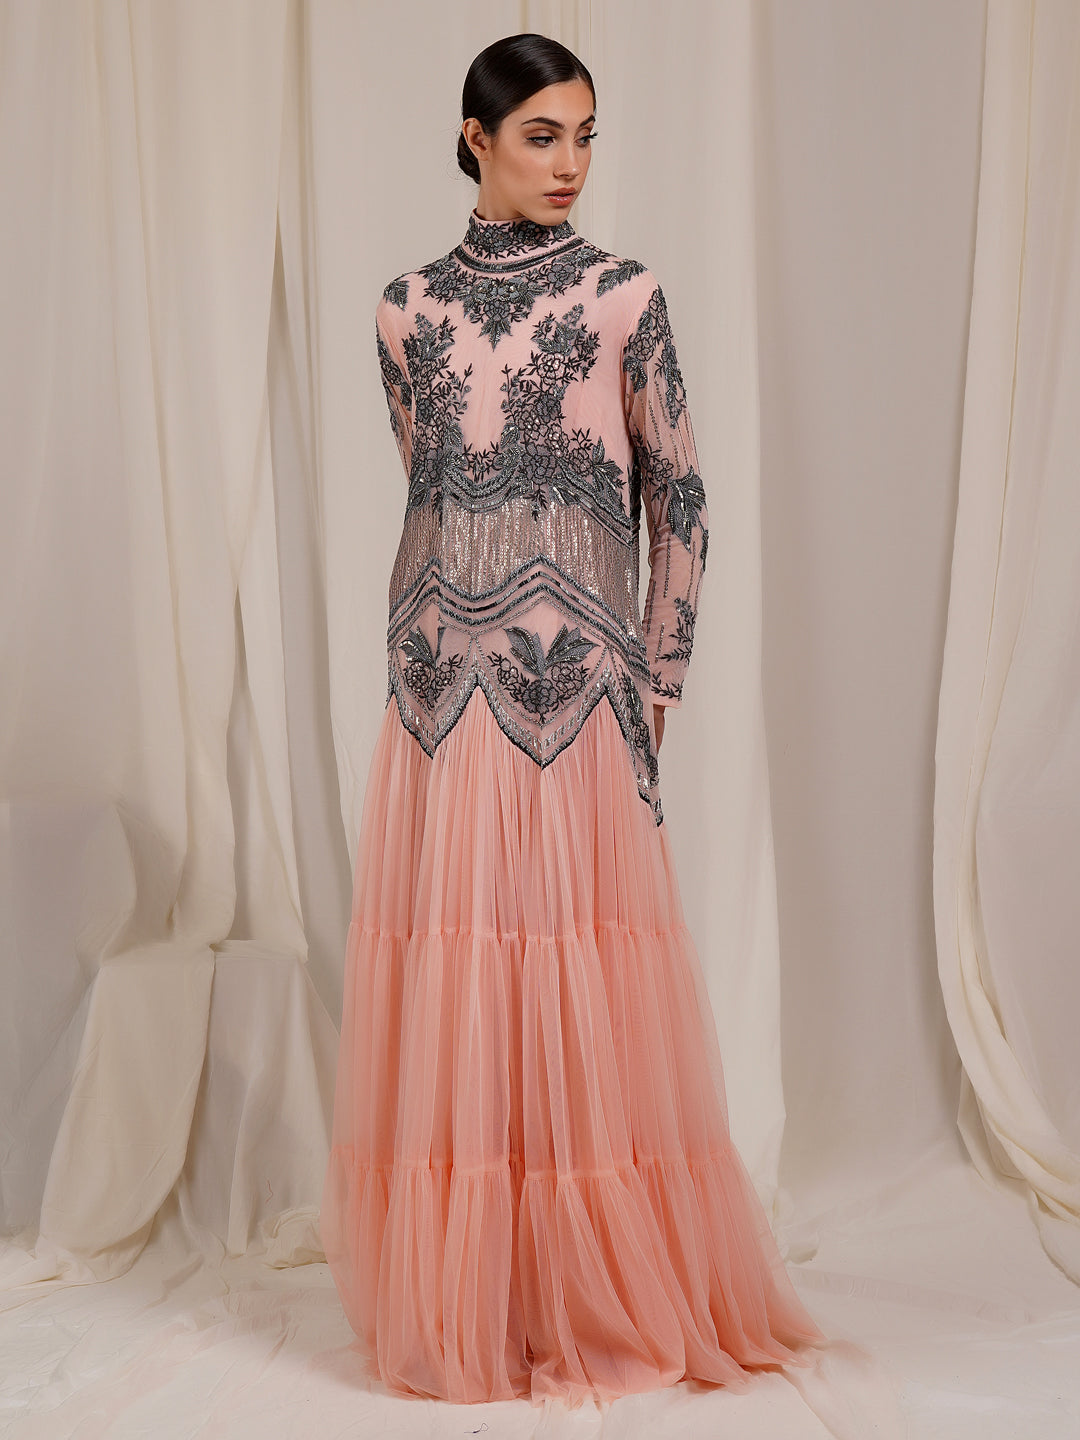 A-Line, High Neck Gown in net At The Top That Is Adorned With Unique Patterns